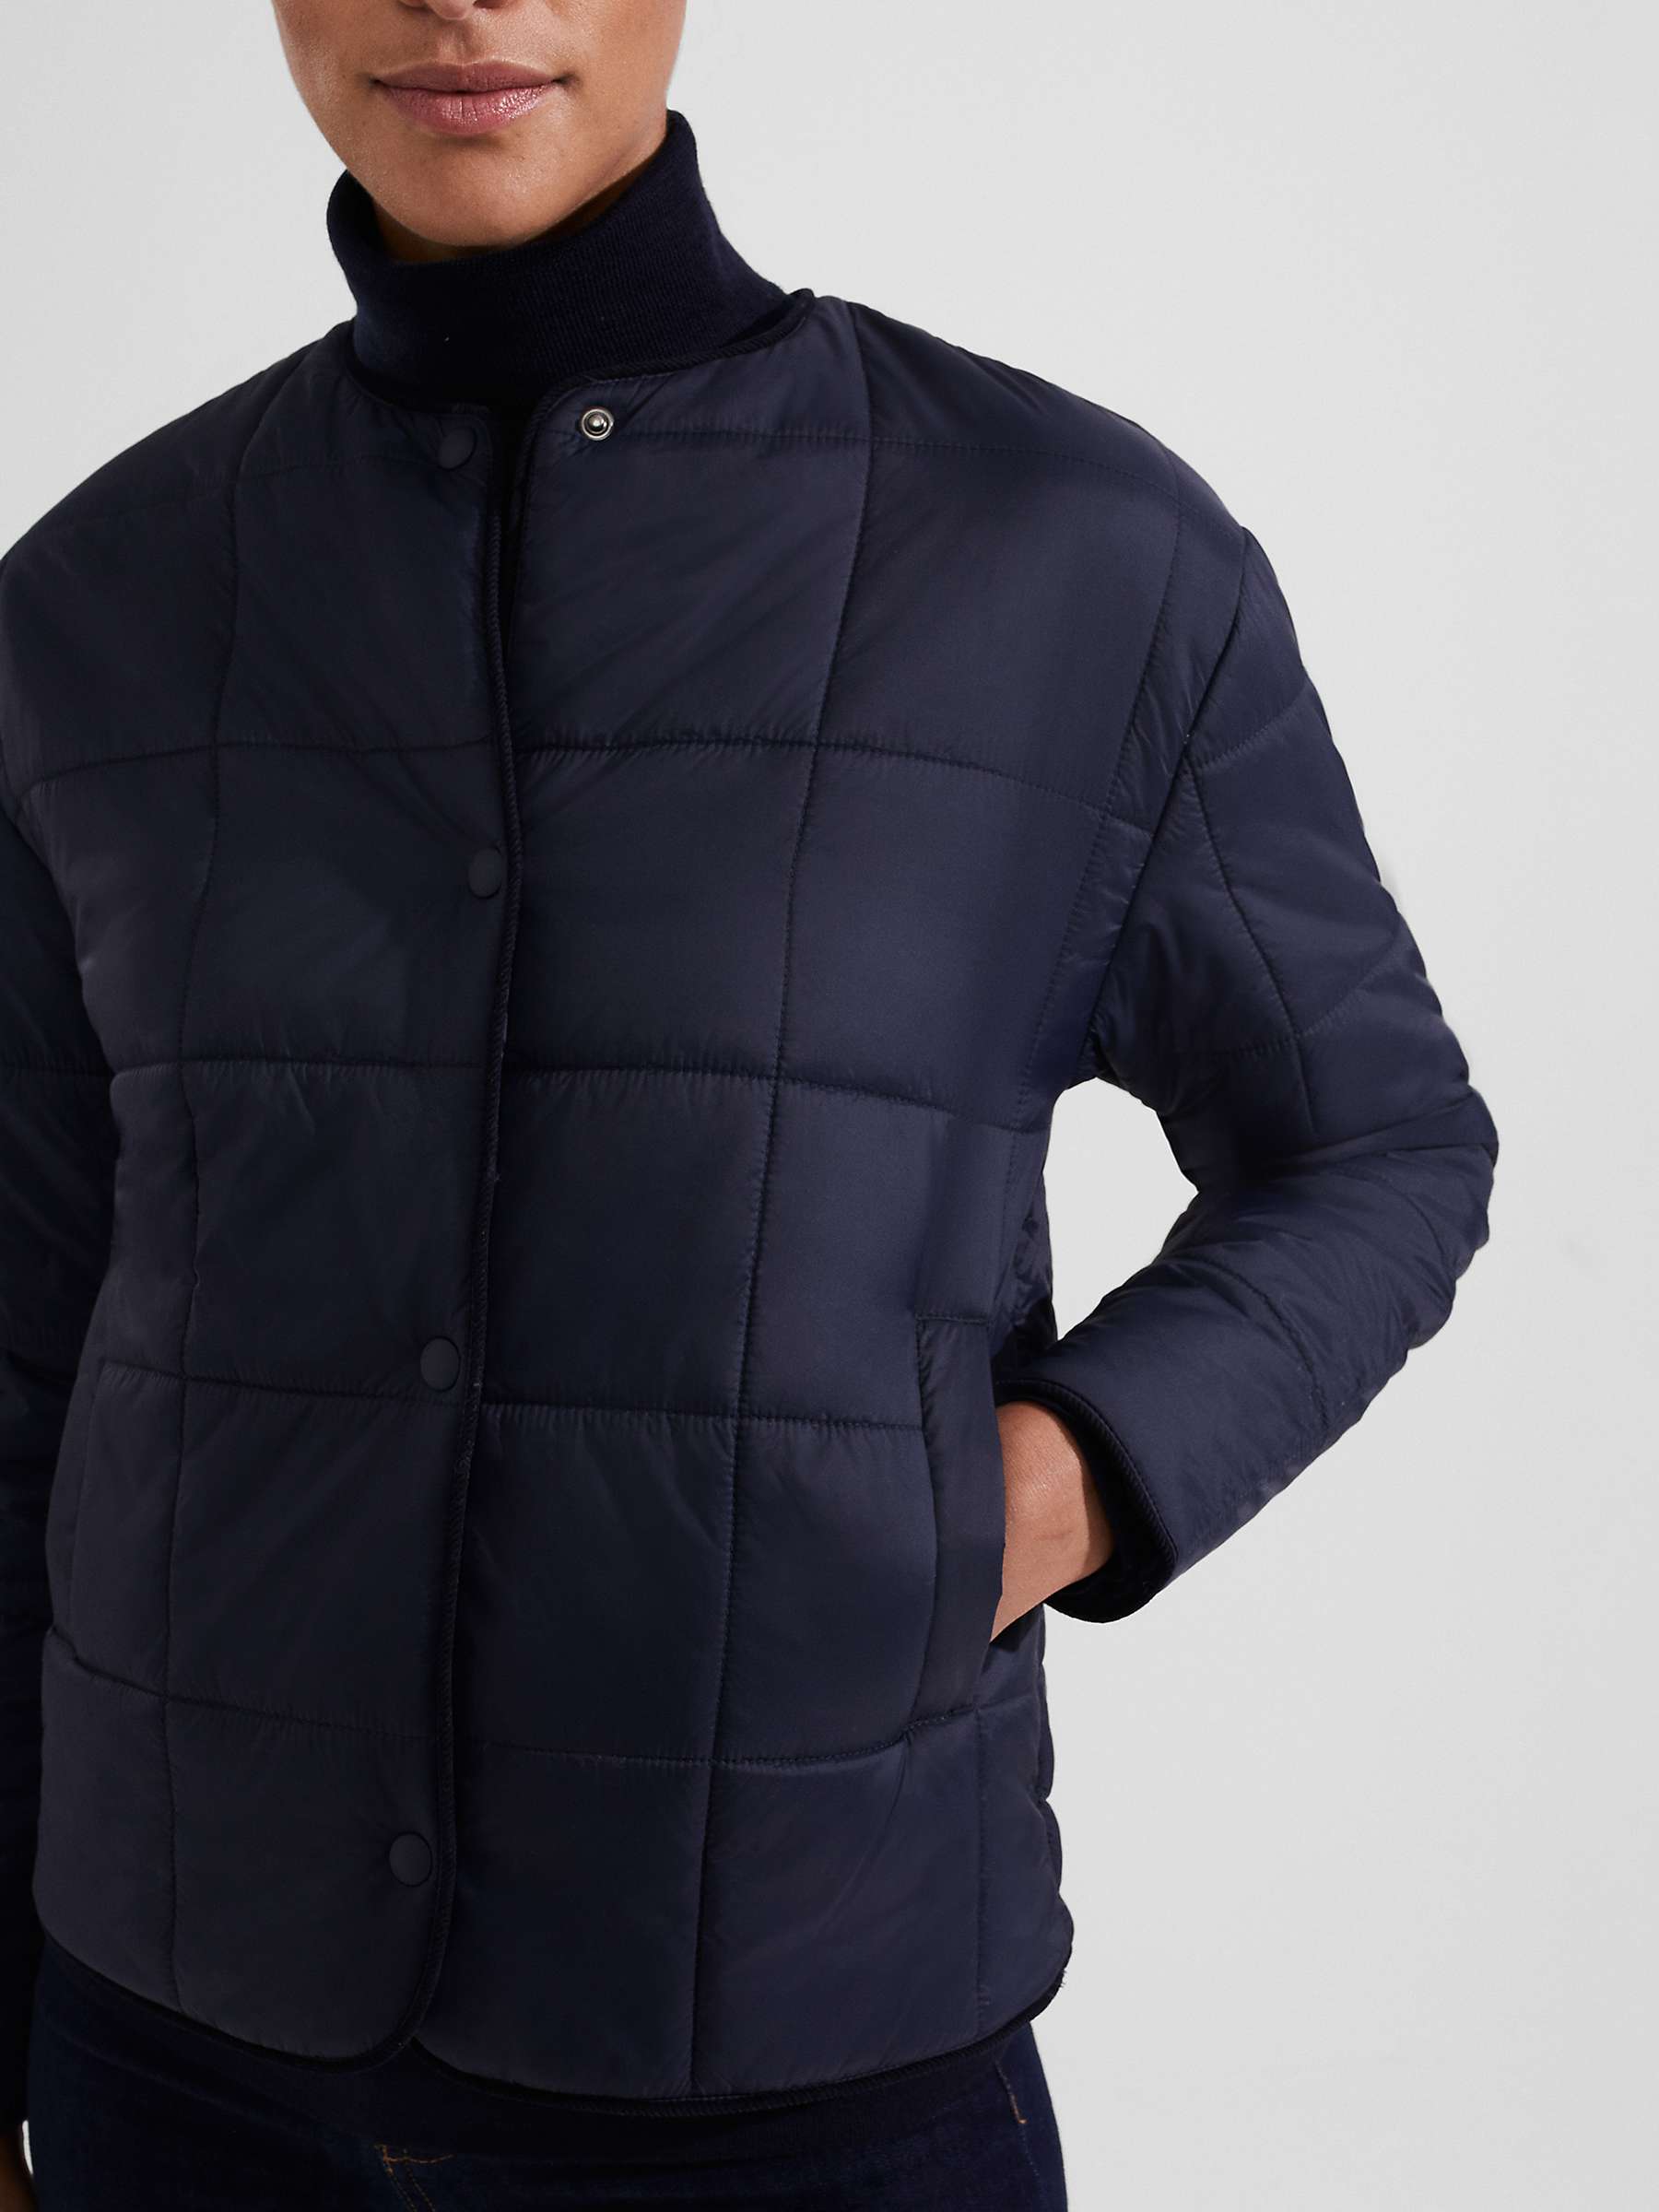 Hobbs Ottilie Collarless Quilted Jacket, Navy at John Lewis & Partners